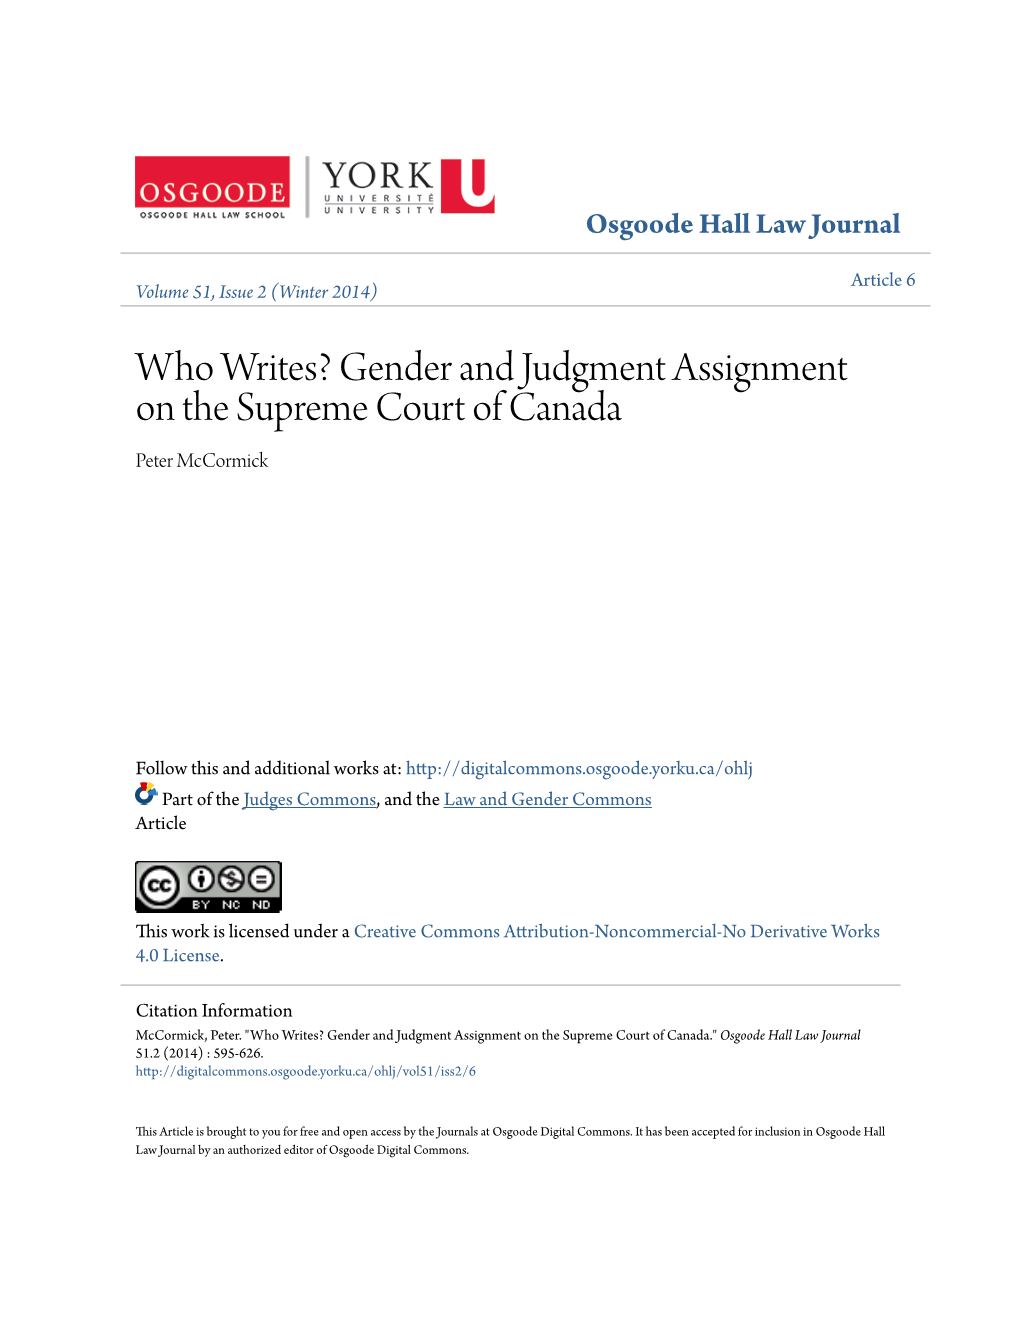 Who Writes? Gender and Judgment Assignment on the Supreme Court of Canada Peter Mccormick